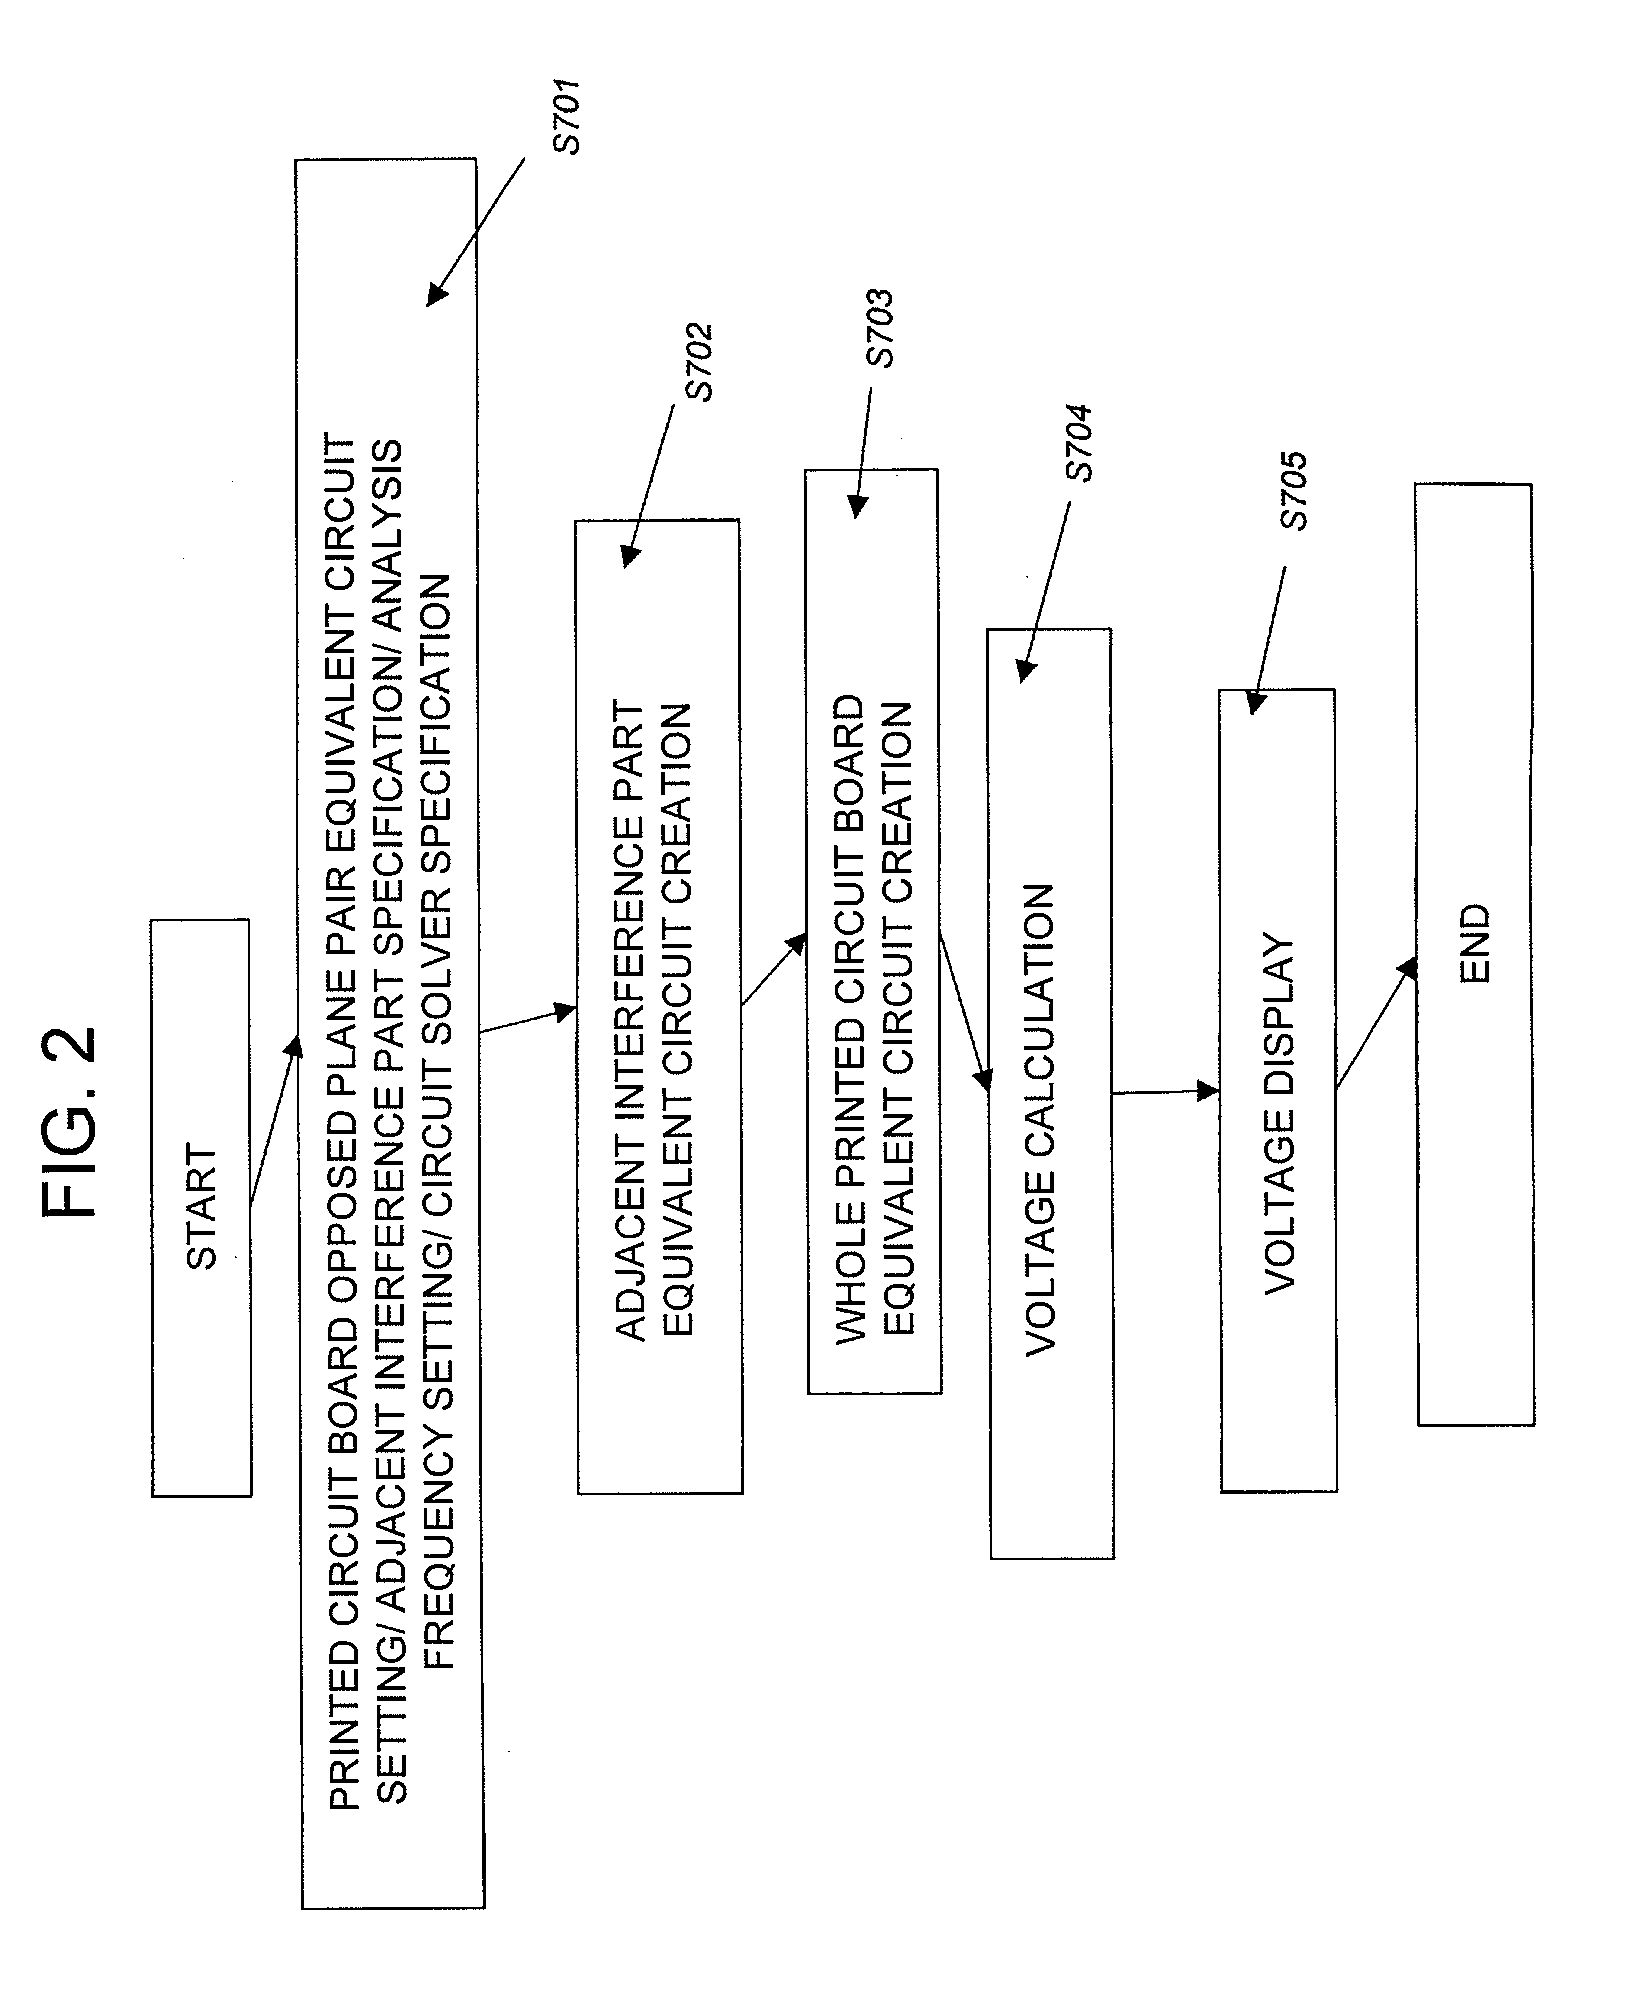 Printed circuit board analyzing system, printed circuit board designing assisting system, their methods, and program